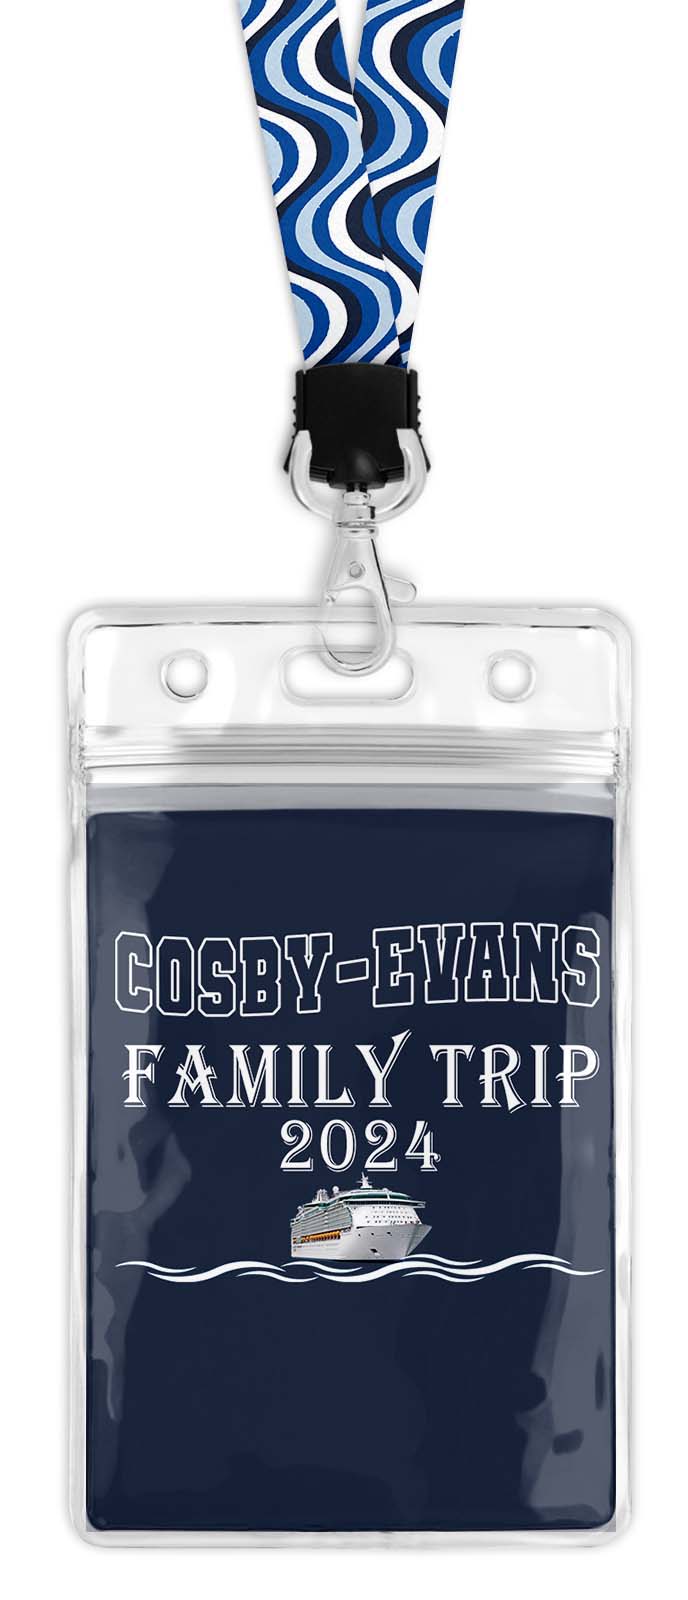 Cosby-Evans Reunion Cruise 2024 Merch Package - V-Neck Shirt & Lanyard